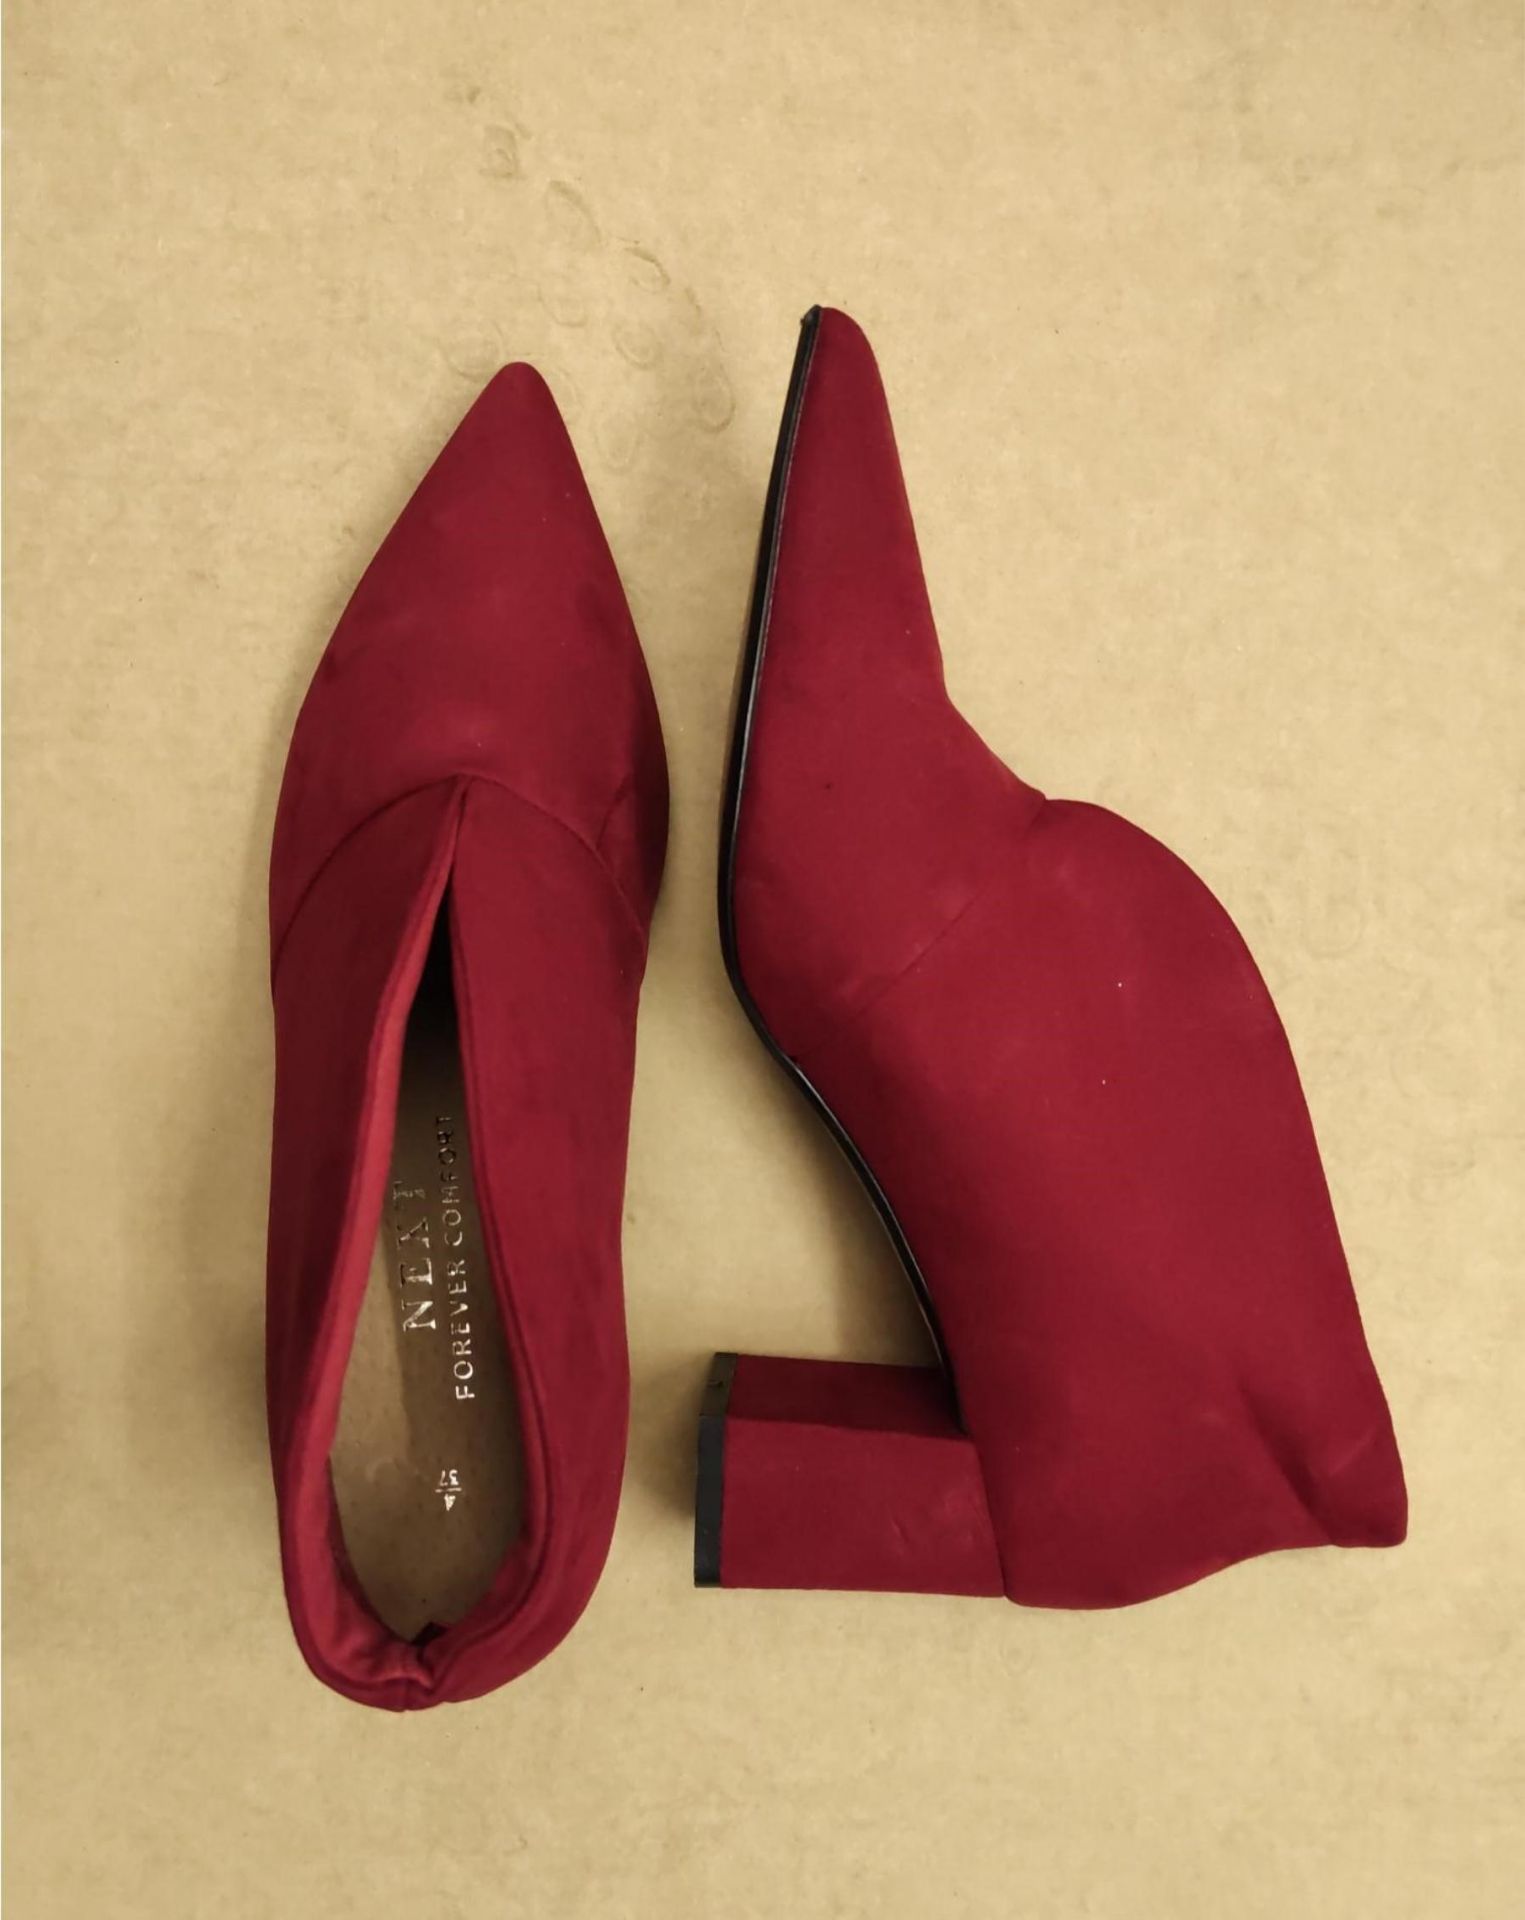 1 x RED SUEDE ANKLE HEEL SIZE 4 £40Condition ReportALL ITEMS ARE BRAND NEW WITH TAGS UNLESS